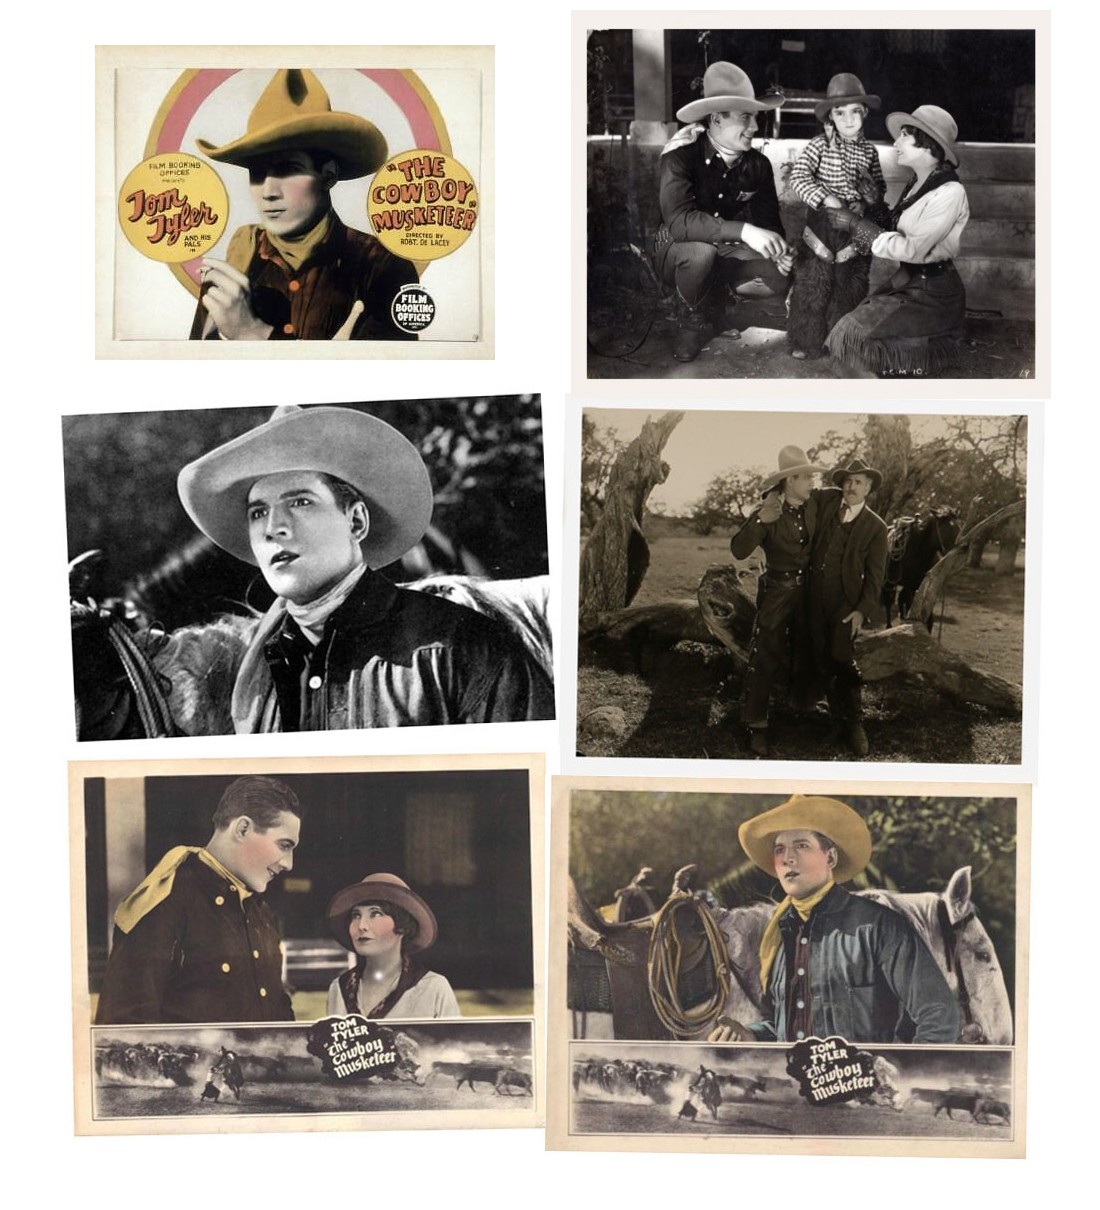 The Cowboy Musketeer film still and lobby cards